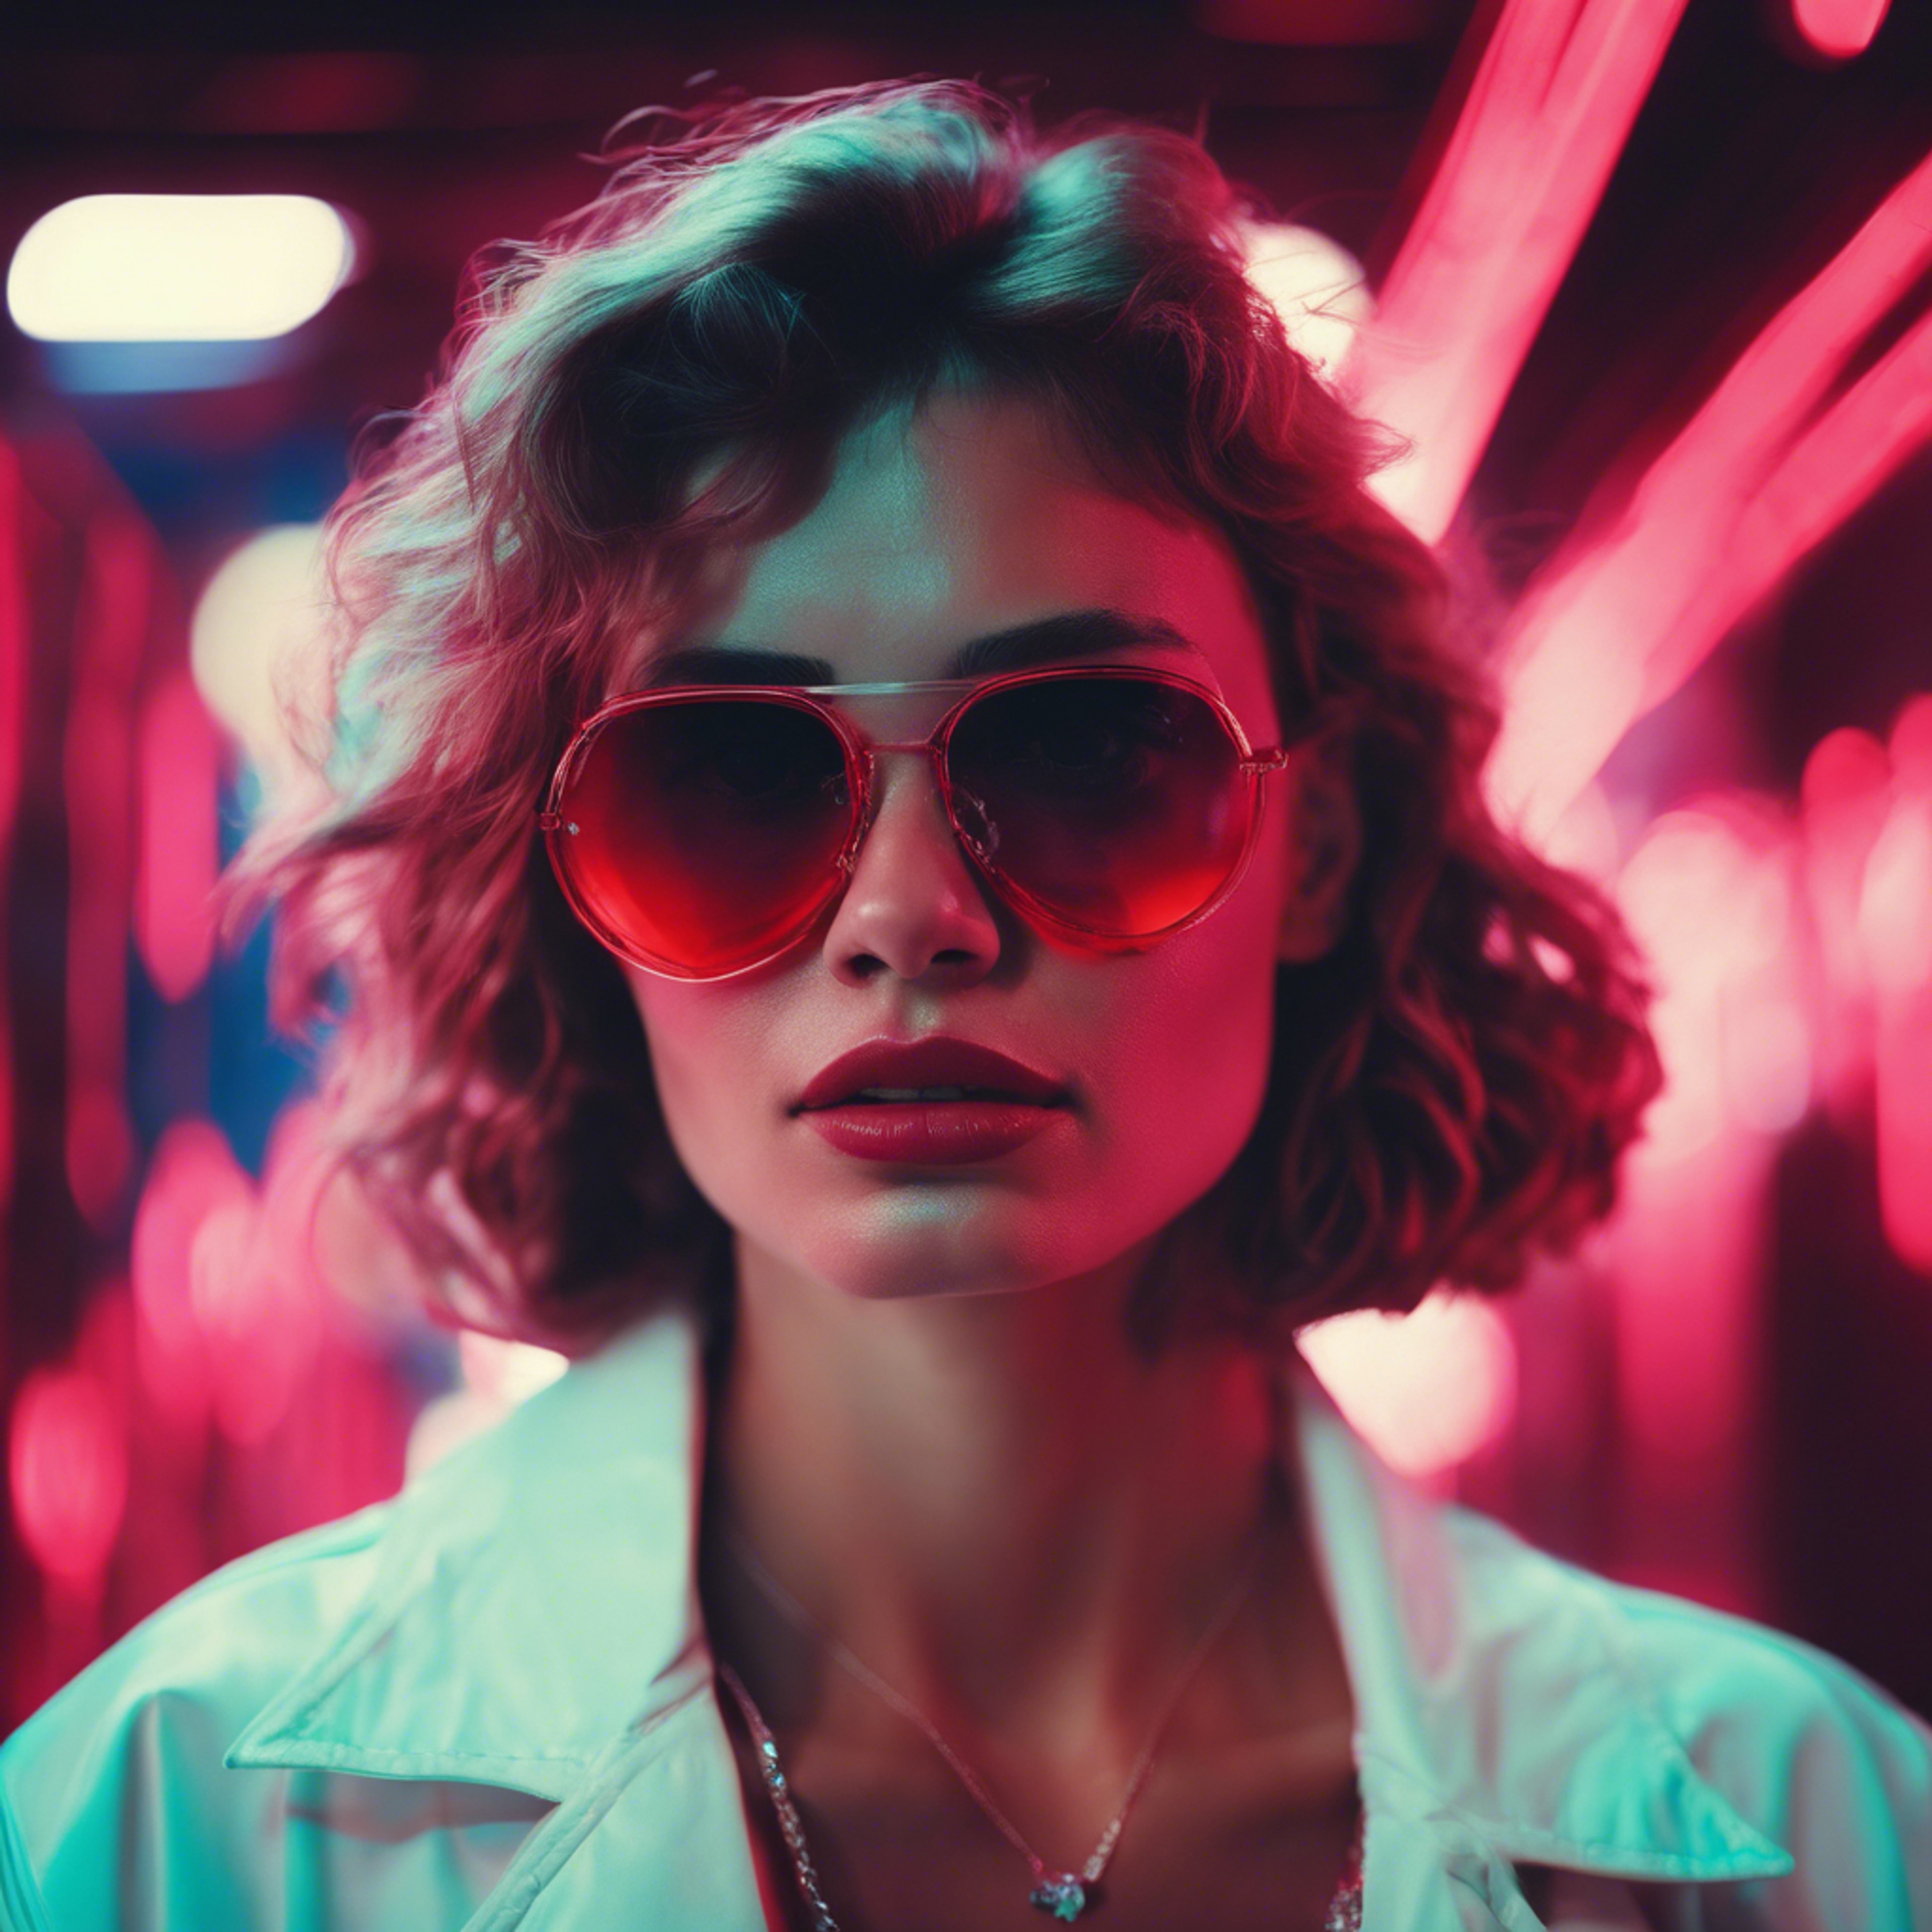 Retro 80's style portrait of a woman in sunglasses lit by cool red neon lights. ورق الجدران[9fb655559f07479e9c29]